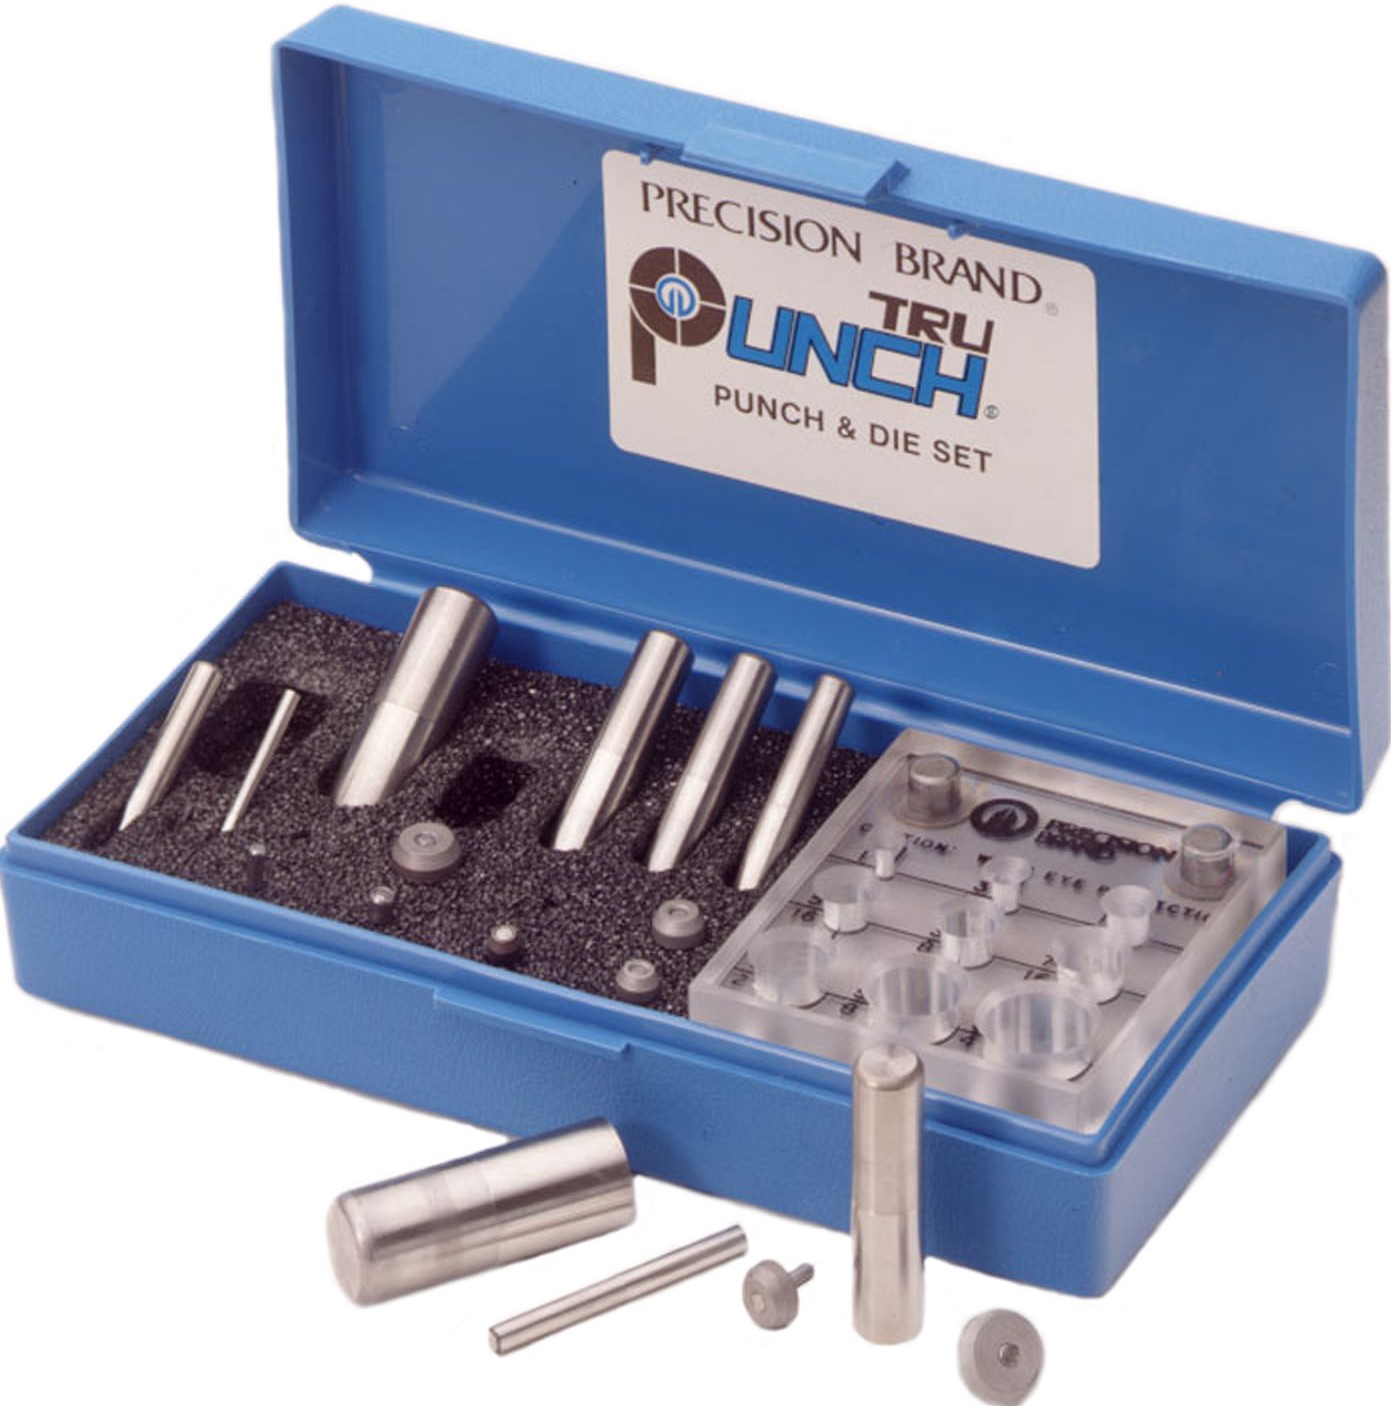 Precision Brand Punch and Die Set 